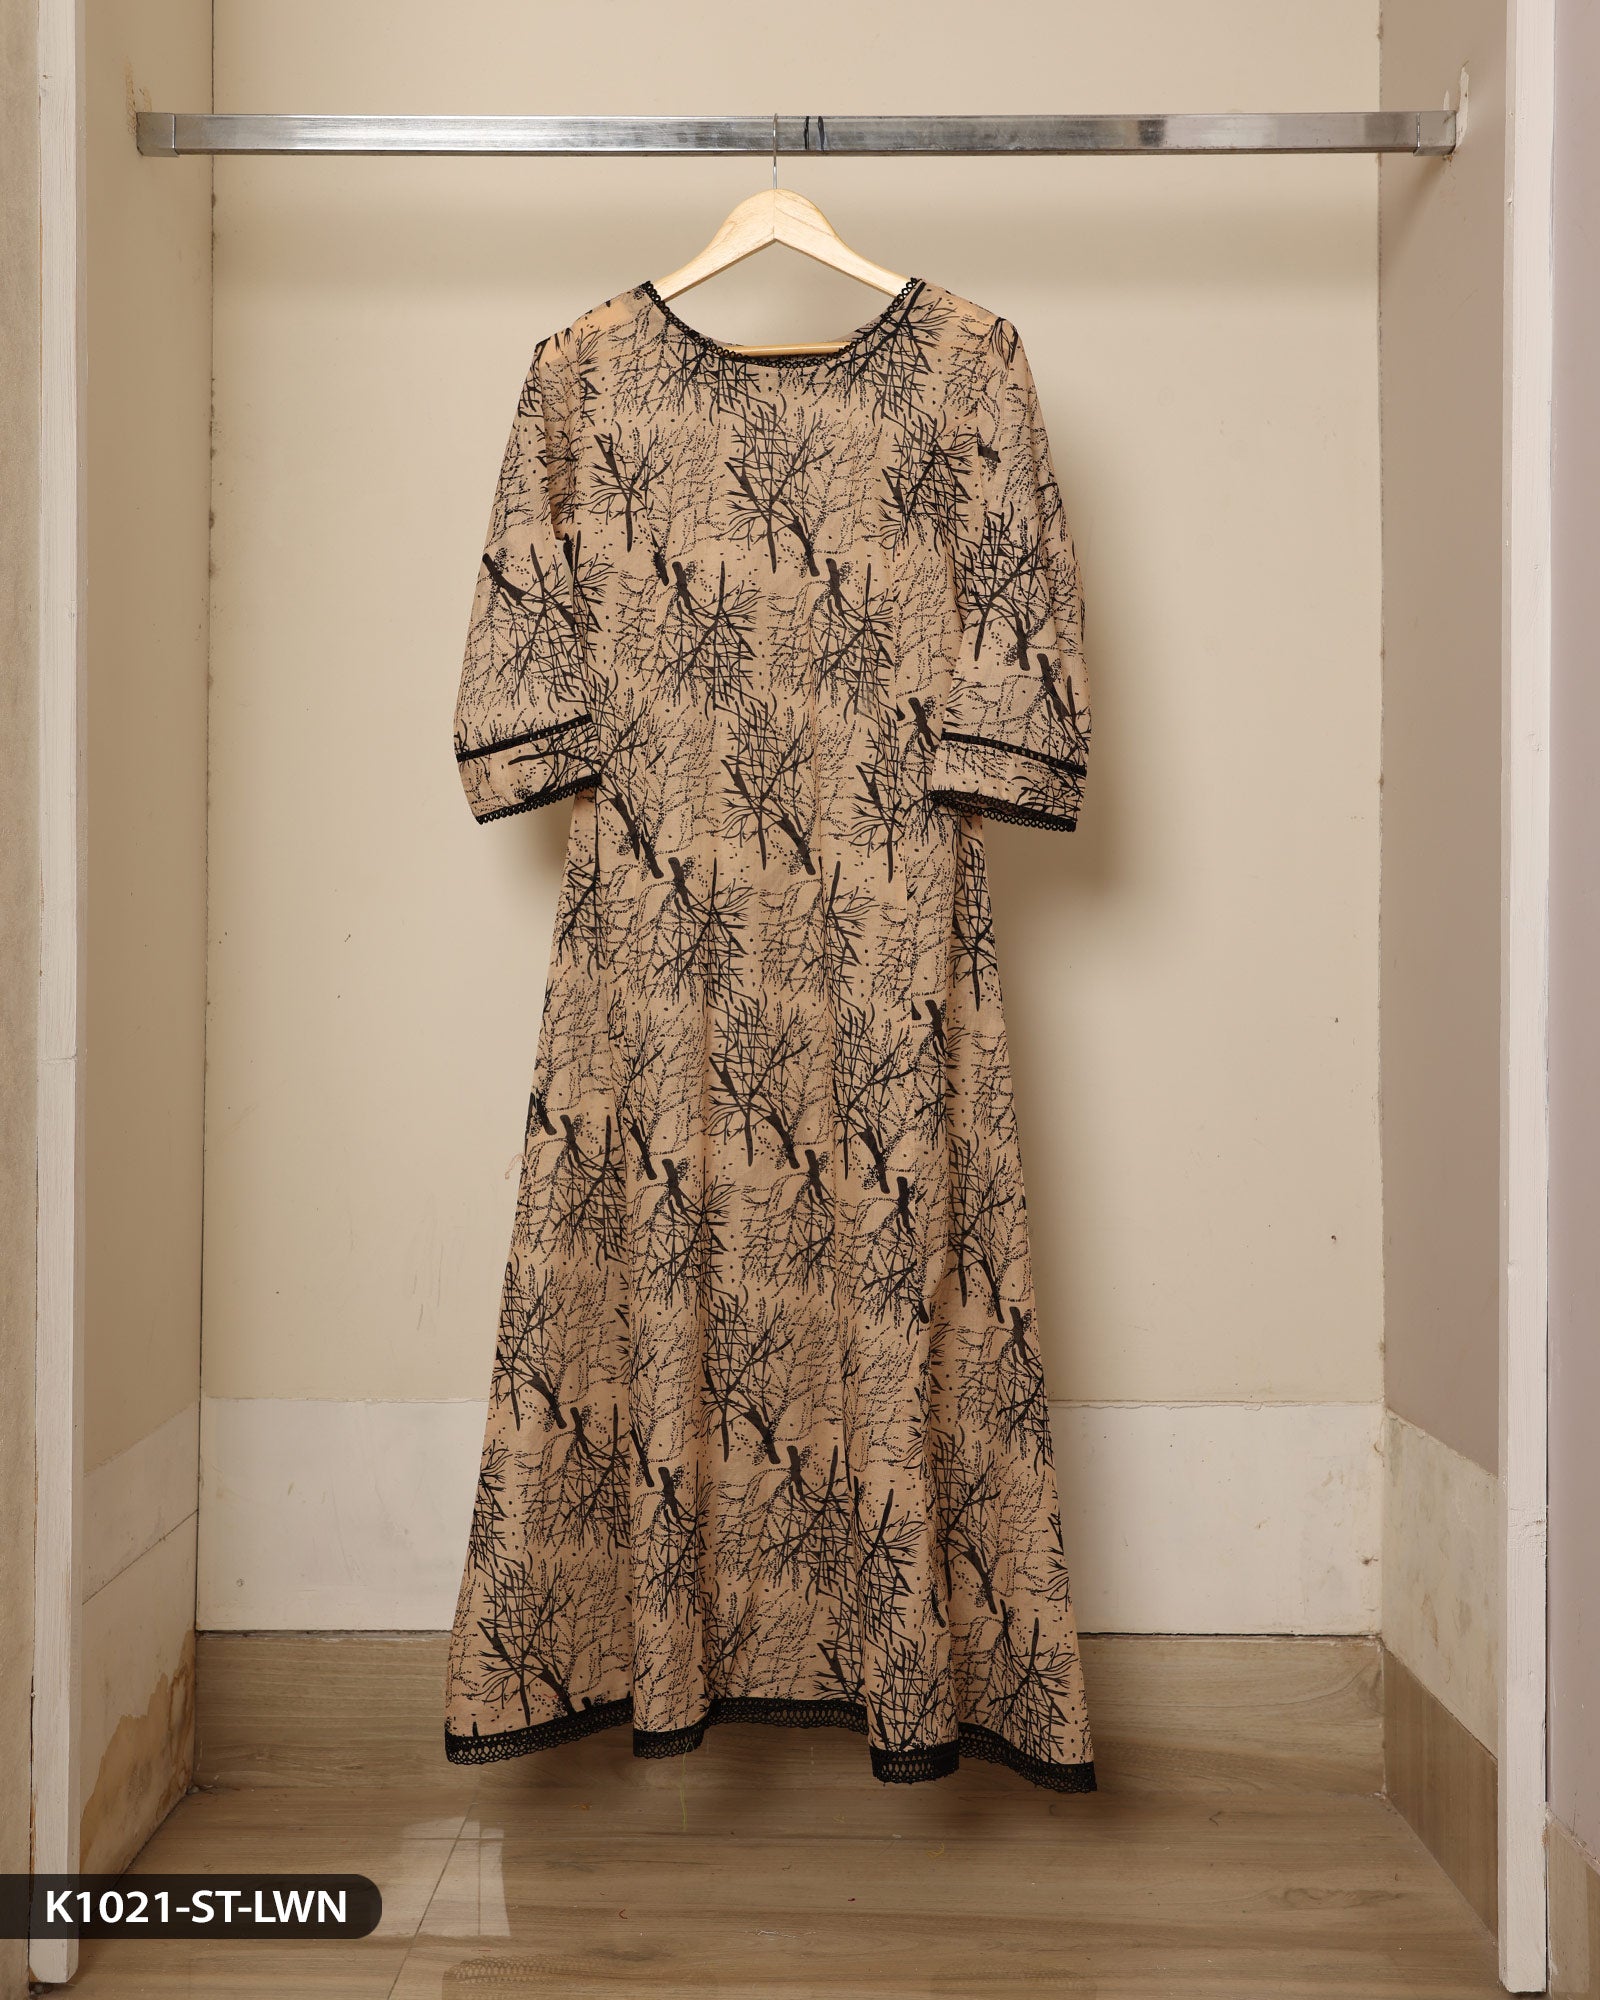 Lawn Printed Frock